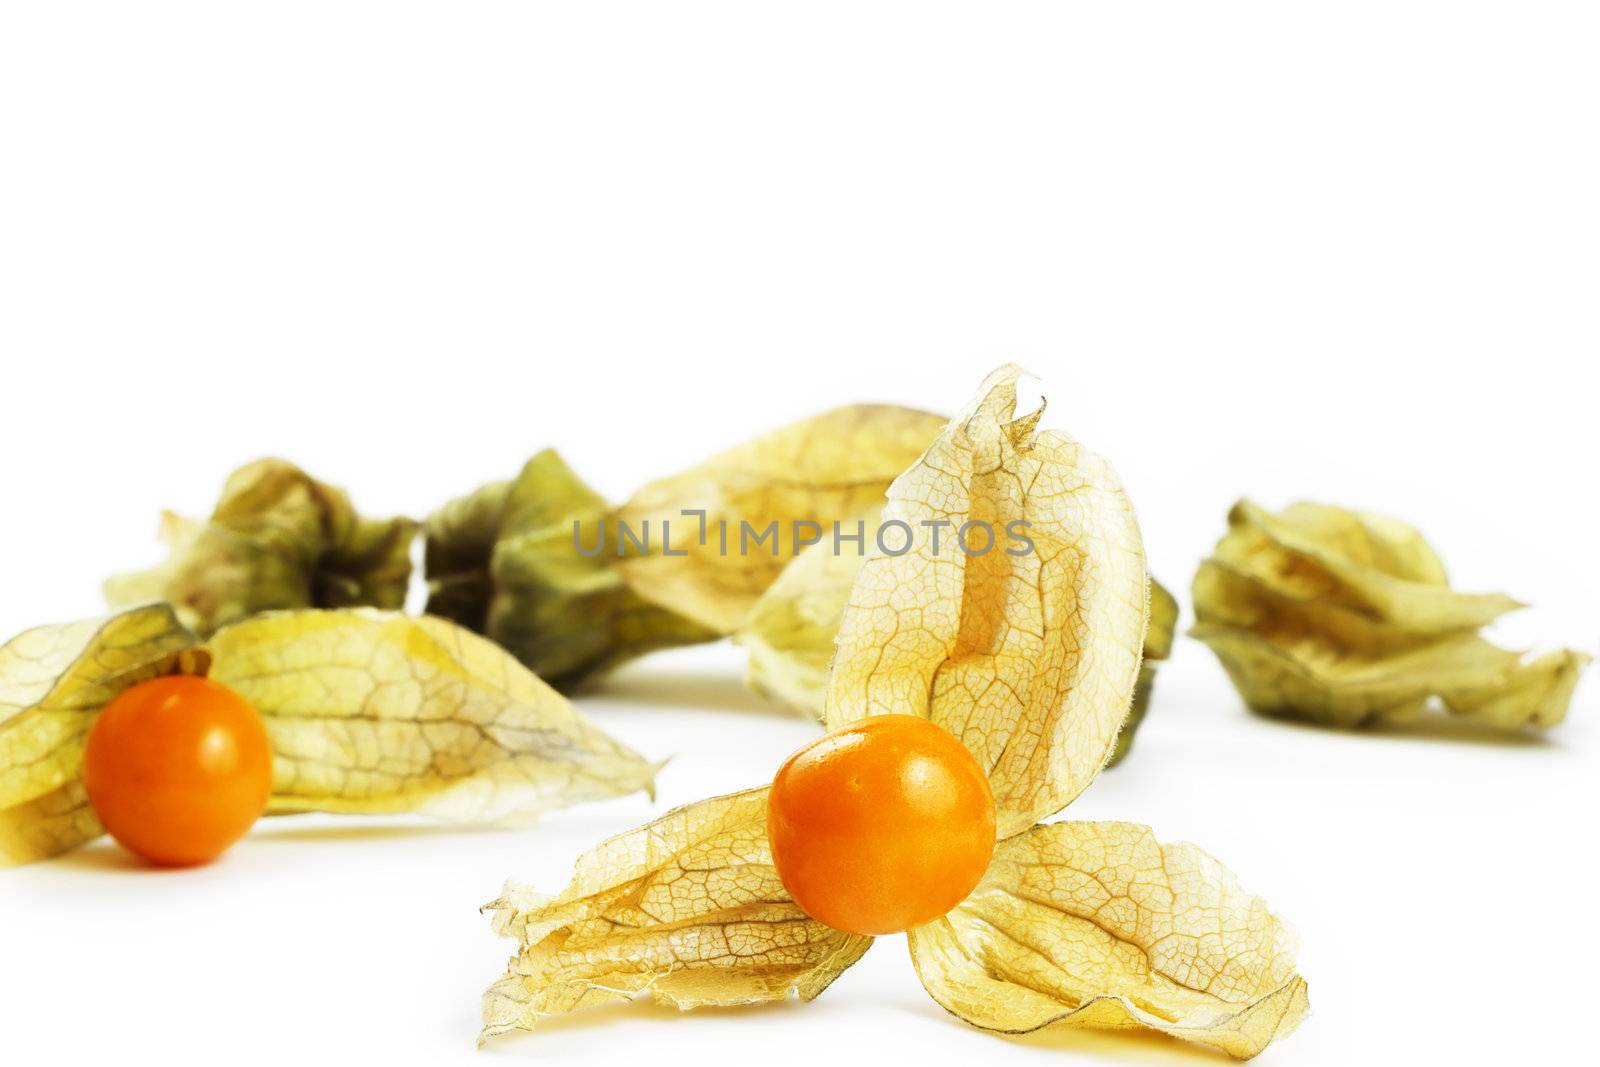 one physalis in front of other physalis on white background